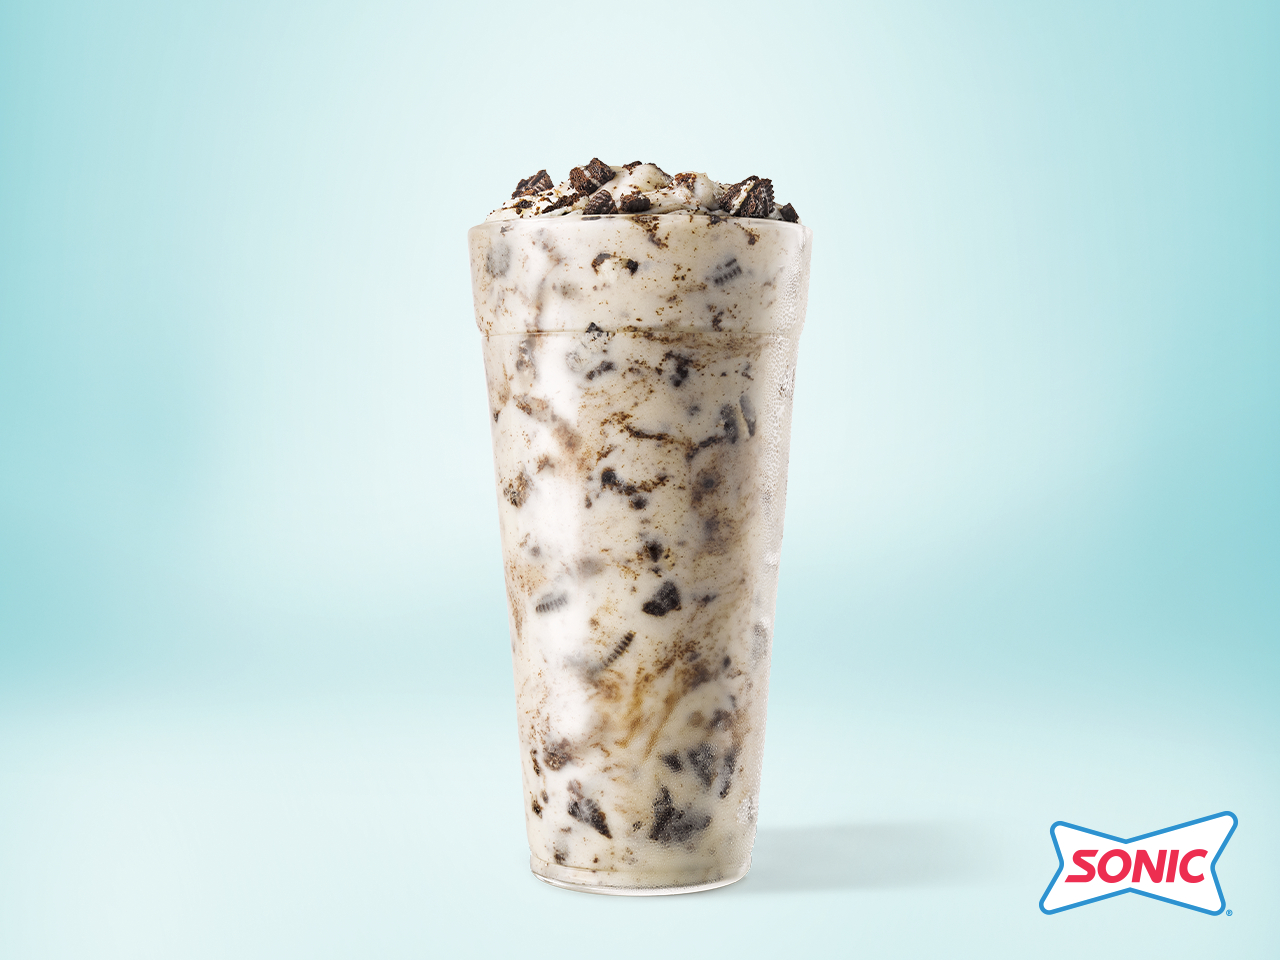 SONIC Doubles the Crave with Return of Double Stuf OREO Waffle Cone & Blast